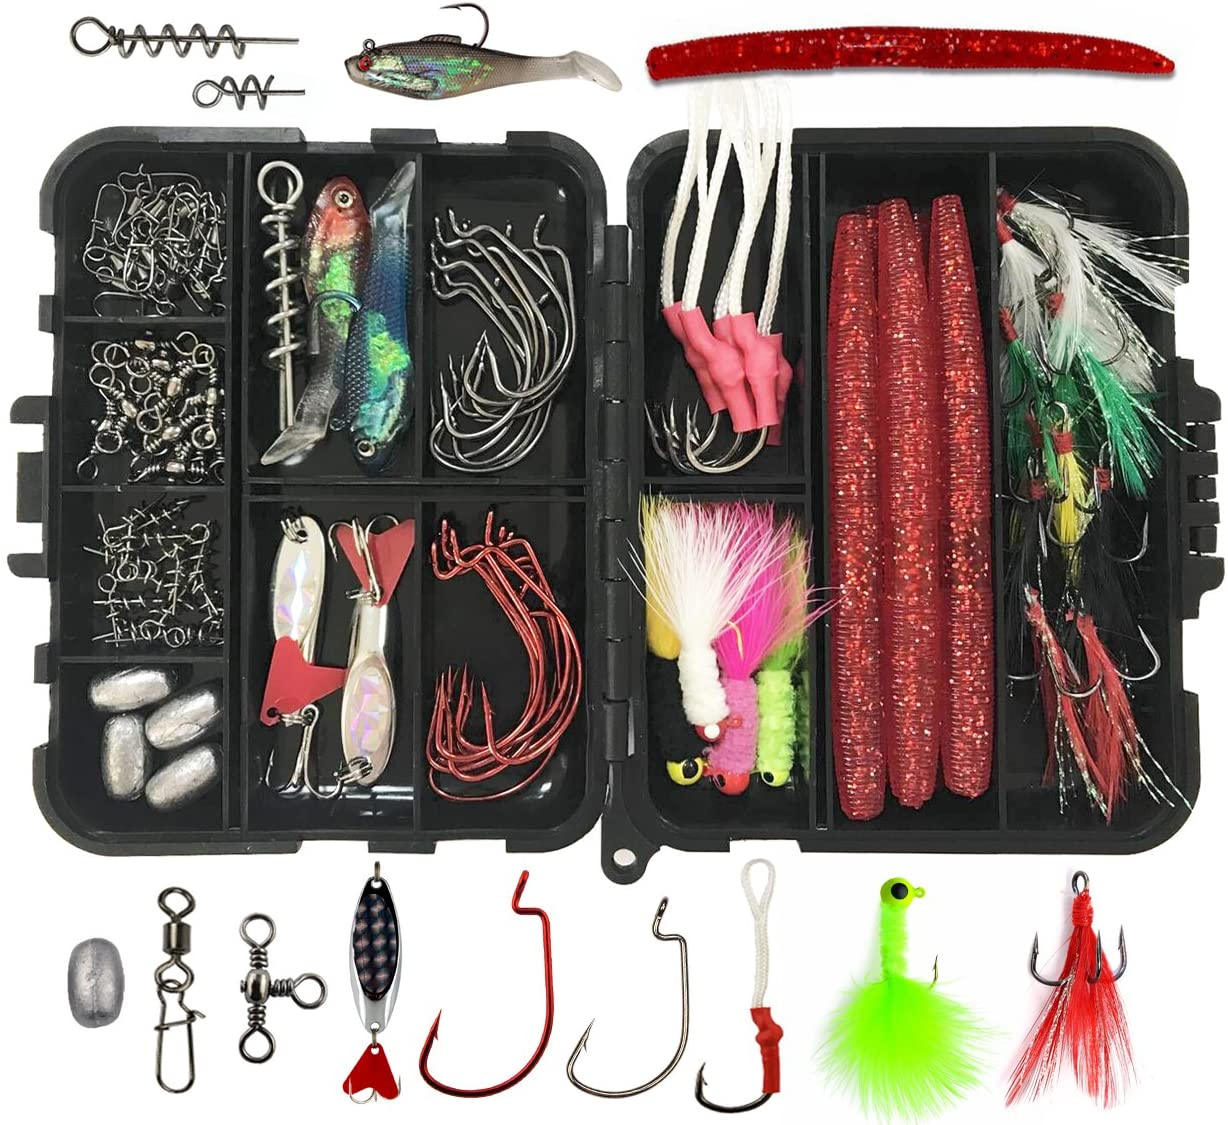 Fishing Lures Hooks Kit 100Pcs Fishing Tackle Box Include Soft Plastic Baits Crappie Jig Heads Bass Jig Hooks Metal Spoons Egg Sinkers Weights Swivels Fishing Tackle Accessories